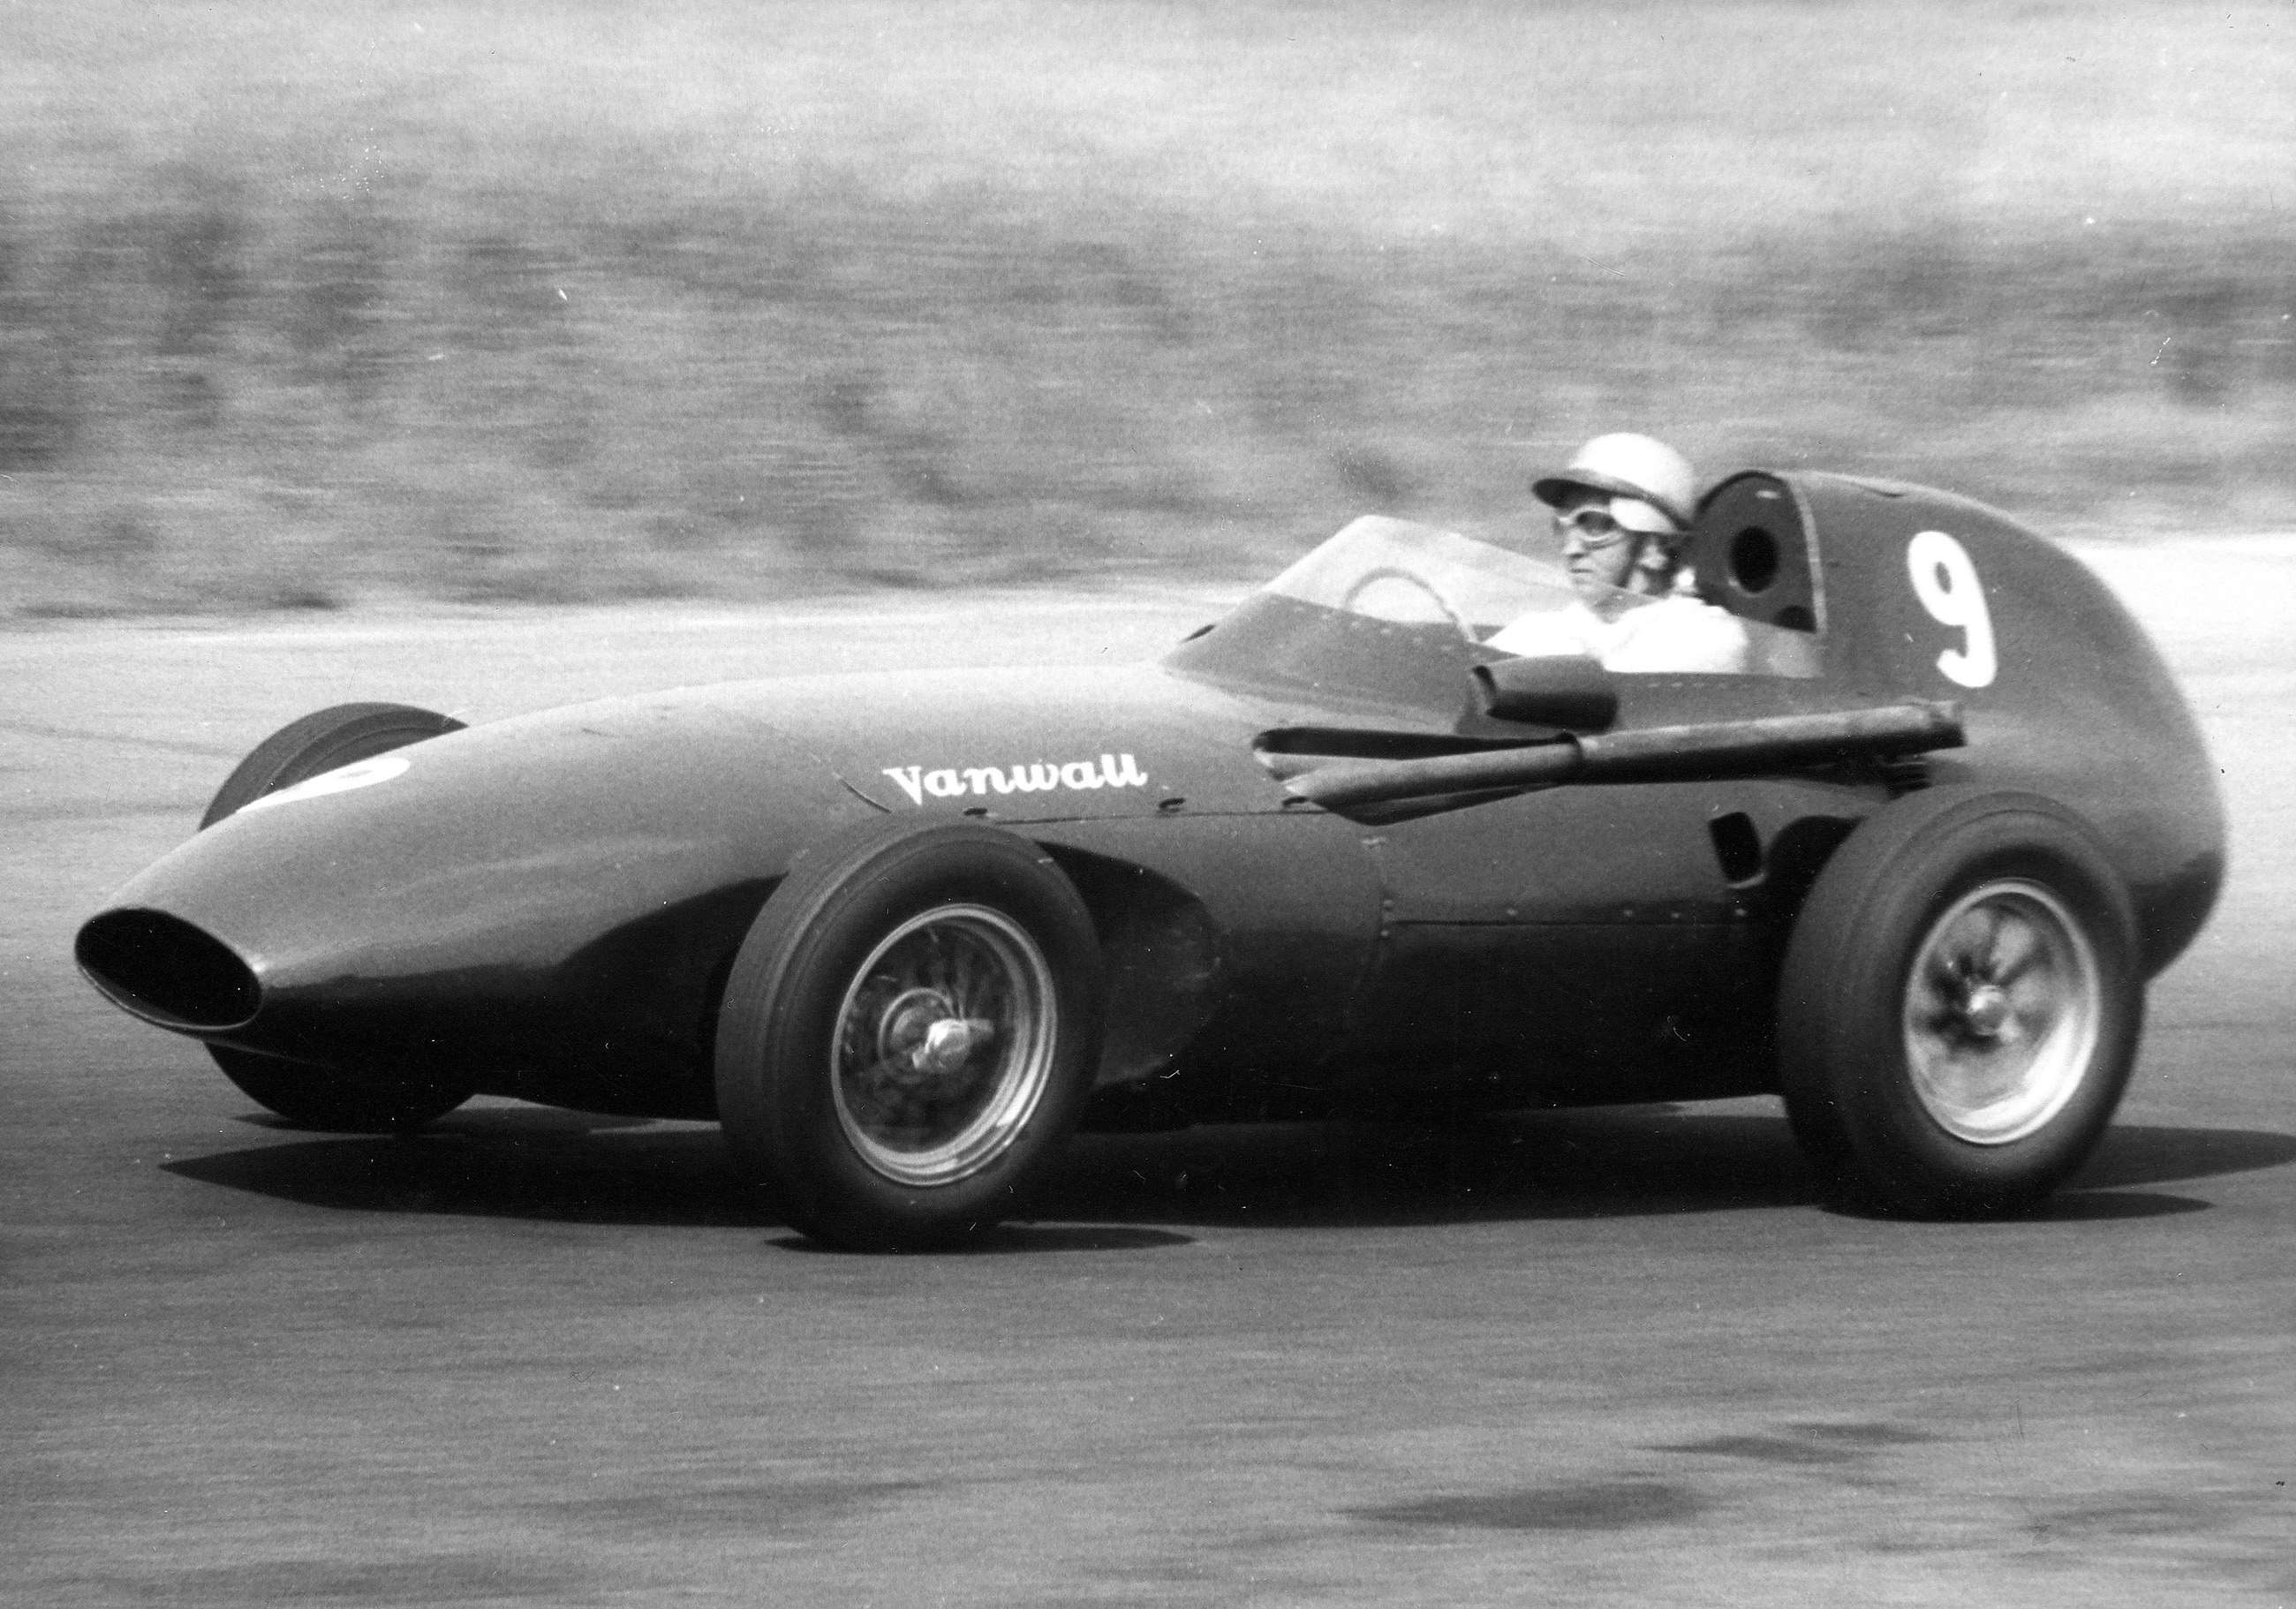 Stuart Lewis-Evans in the emergent ‘teardrop’ Vanwall - the Acton-based team would win the 1958 Formula 1 Constructors’ Championship title ahead of Ferrari.